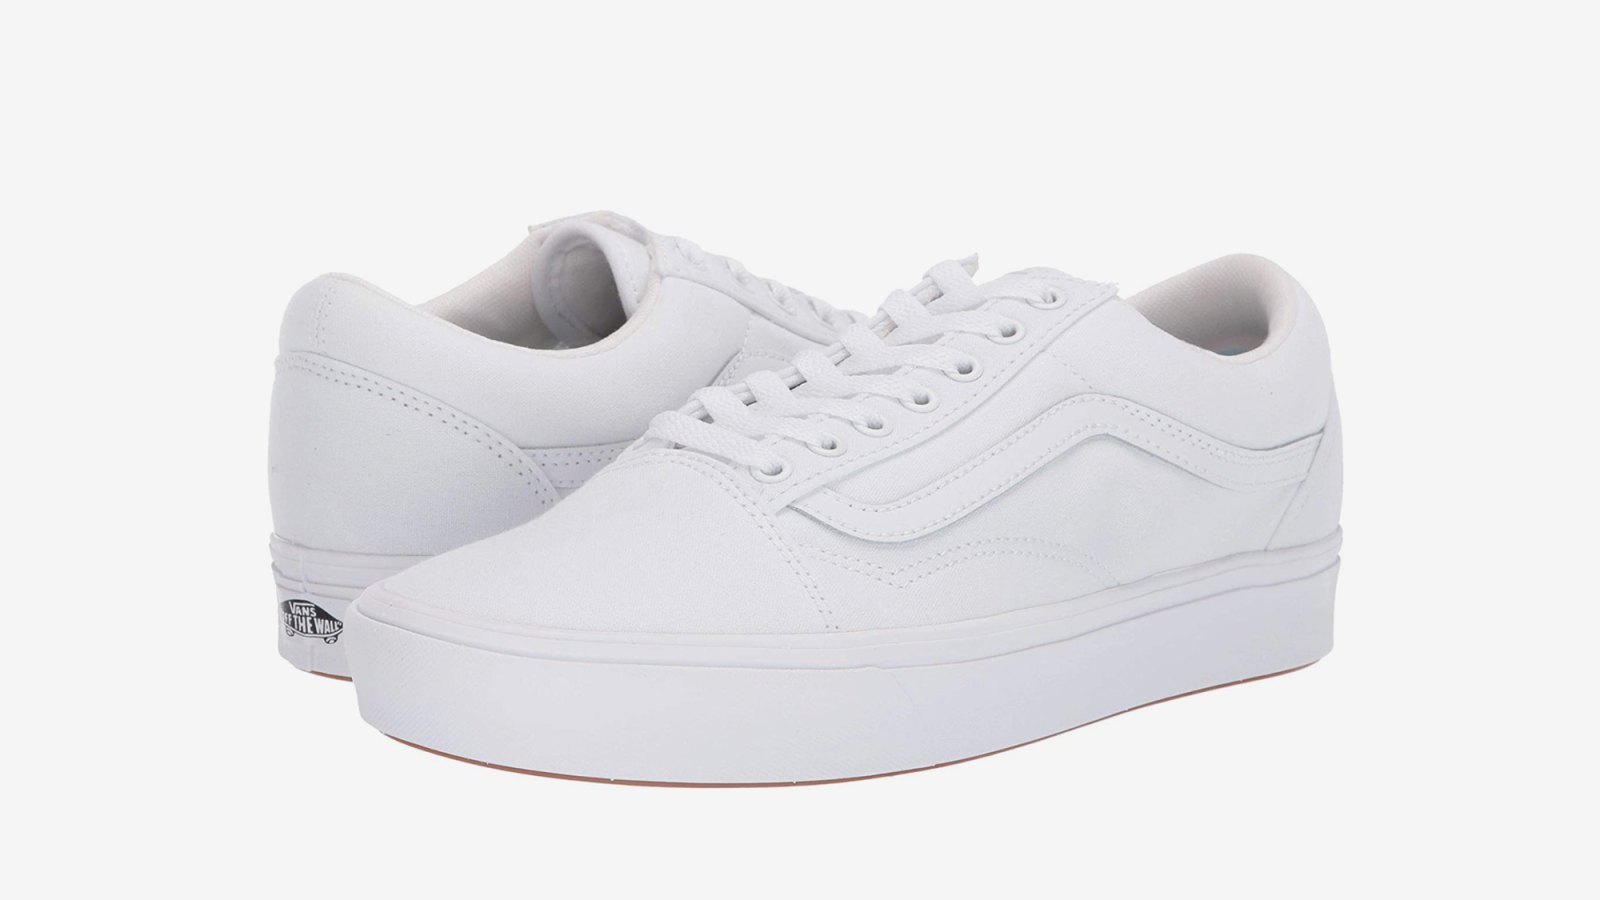 Emigrere forarbejdning amme Vans Old Skools Might Become Your New Go-To White Sneakers